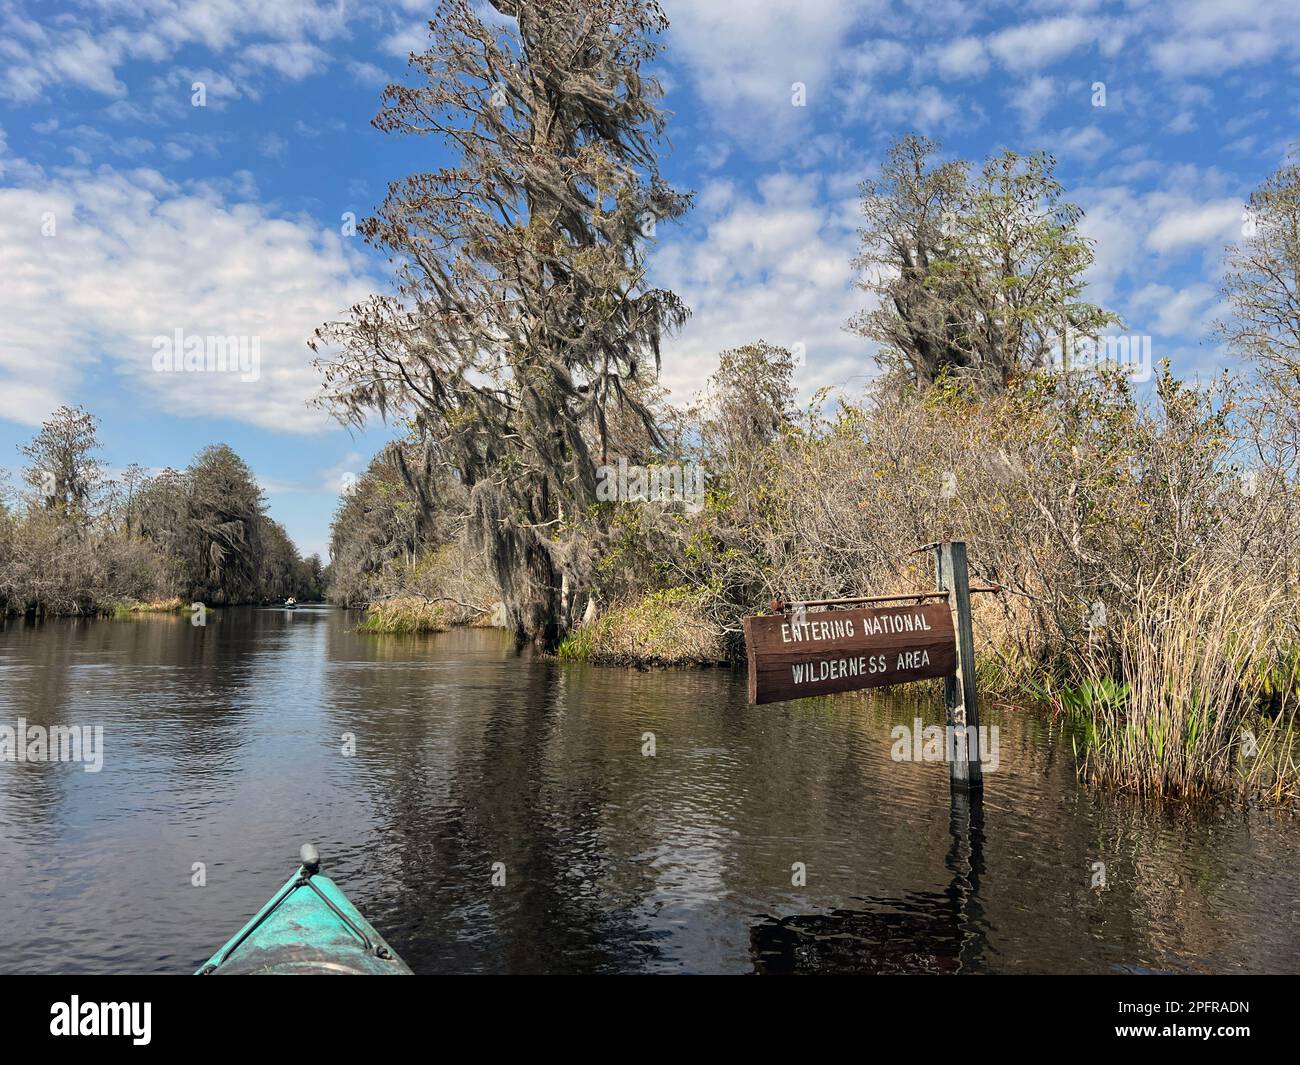 Kayaking marked trails in the Okefenokee National Wildlife Refuge, North America's largest blackwater swarm and home to diverse wildlife, including al. Stock Photo